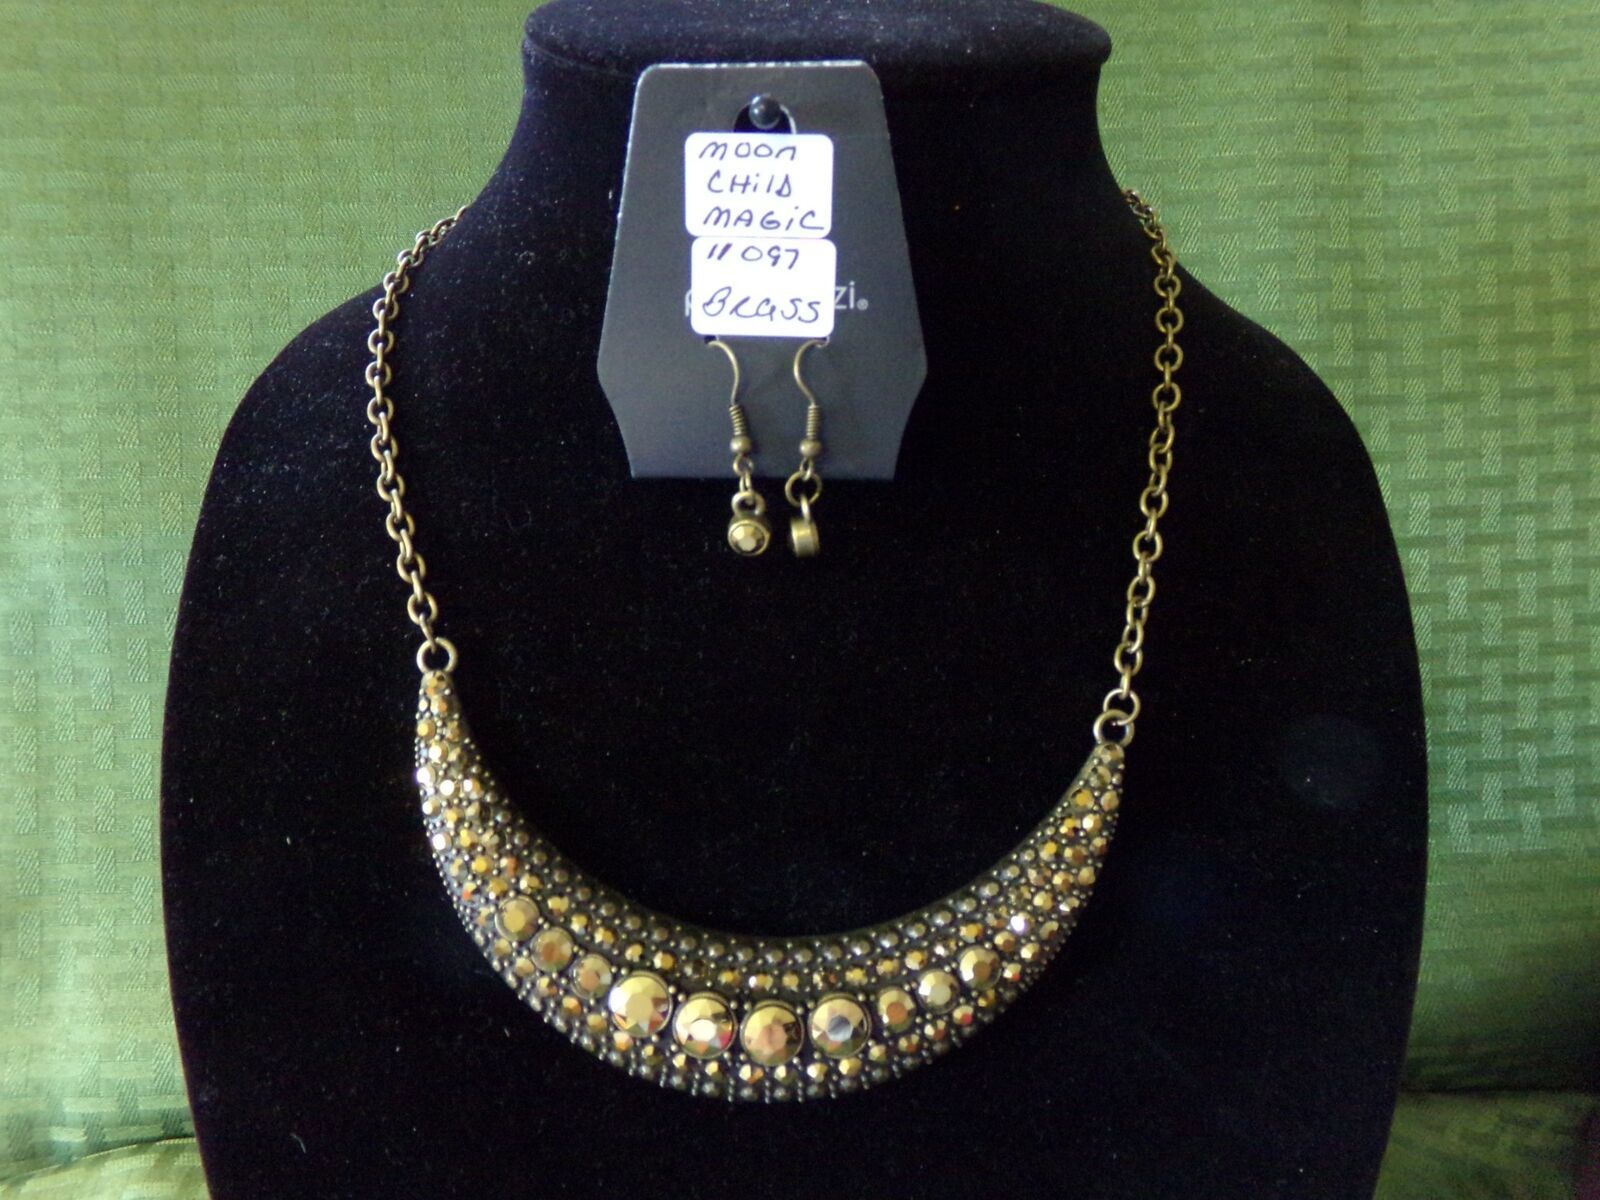 Primary image for Paparazzi Necklace/Earring Set - Short (new) 11097 Moon Child Magic /Brass